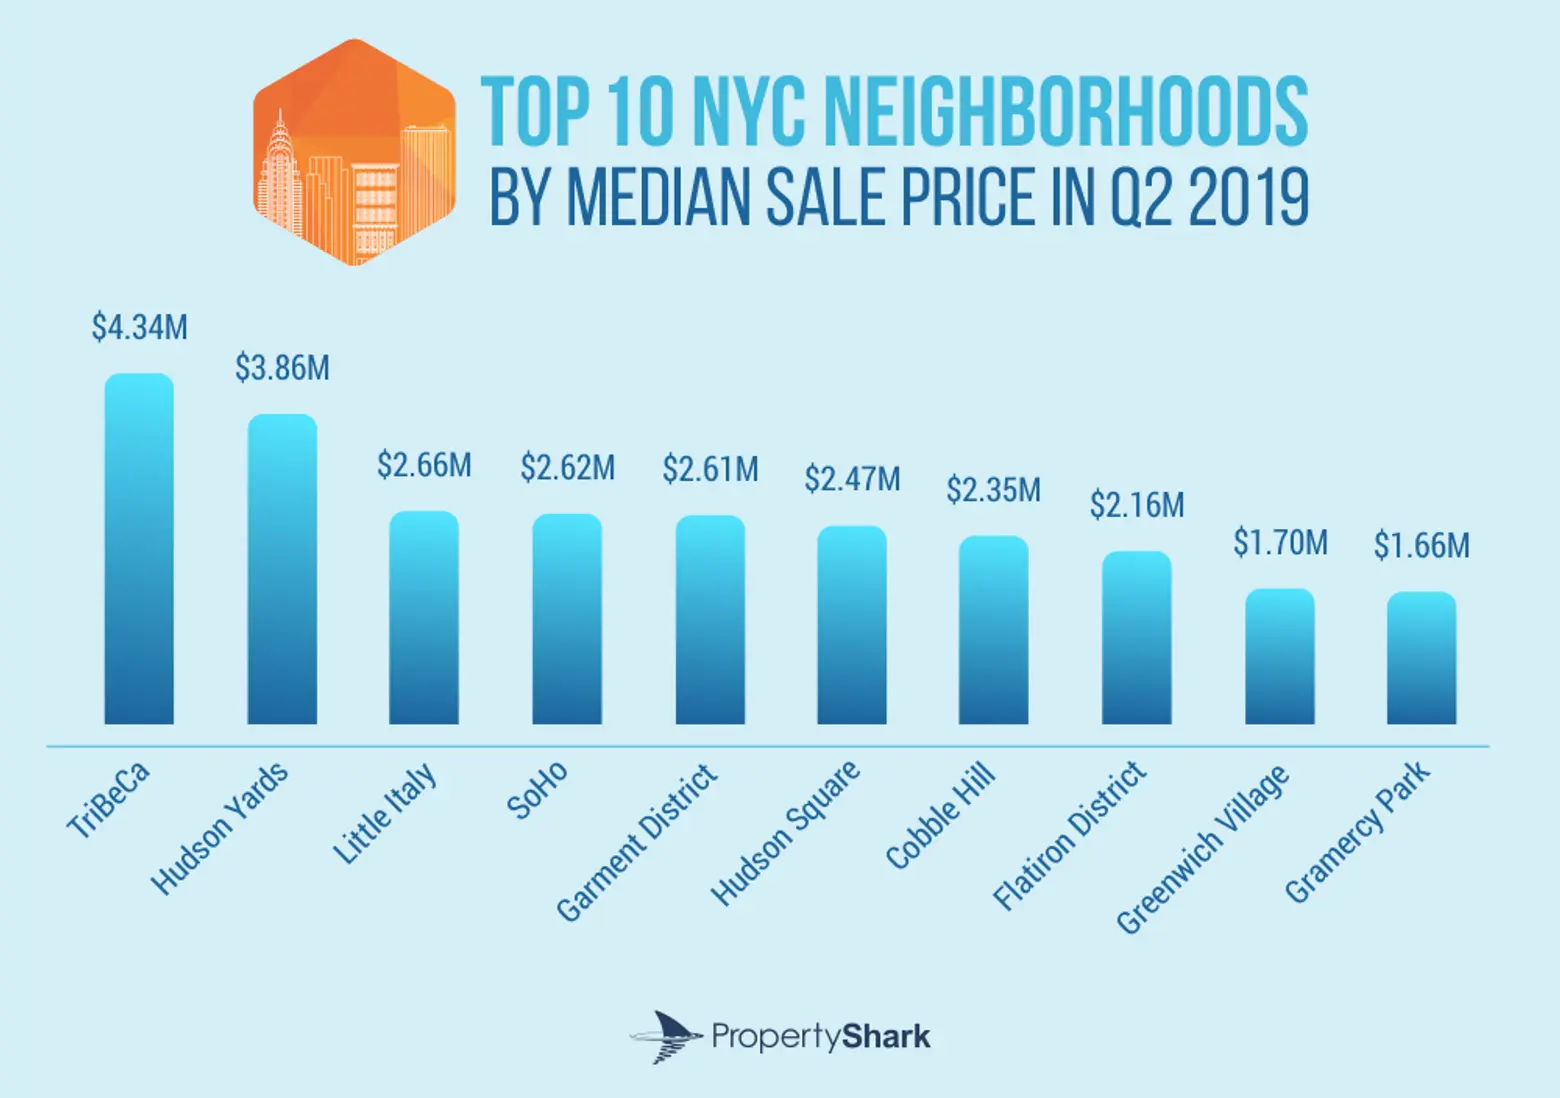 most expensive nyc neighborhoods, property shark, median home prices